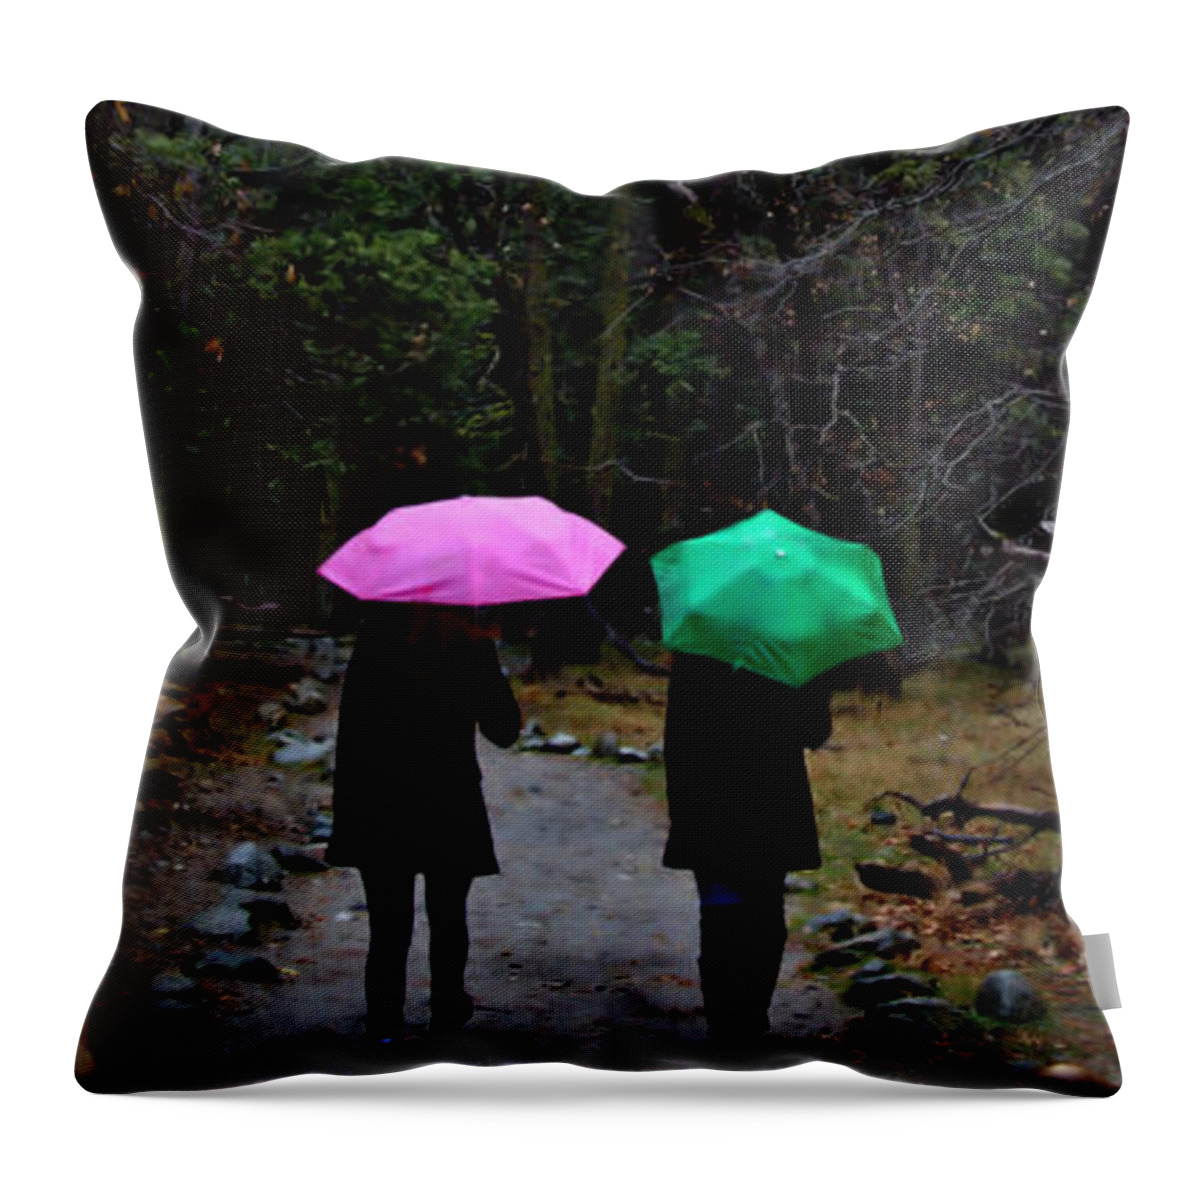 Umbrella Throw Pillow featuring the photograph Pink and Green by Josephine Buschman